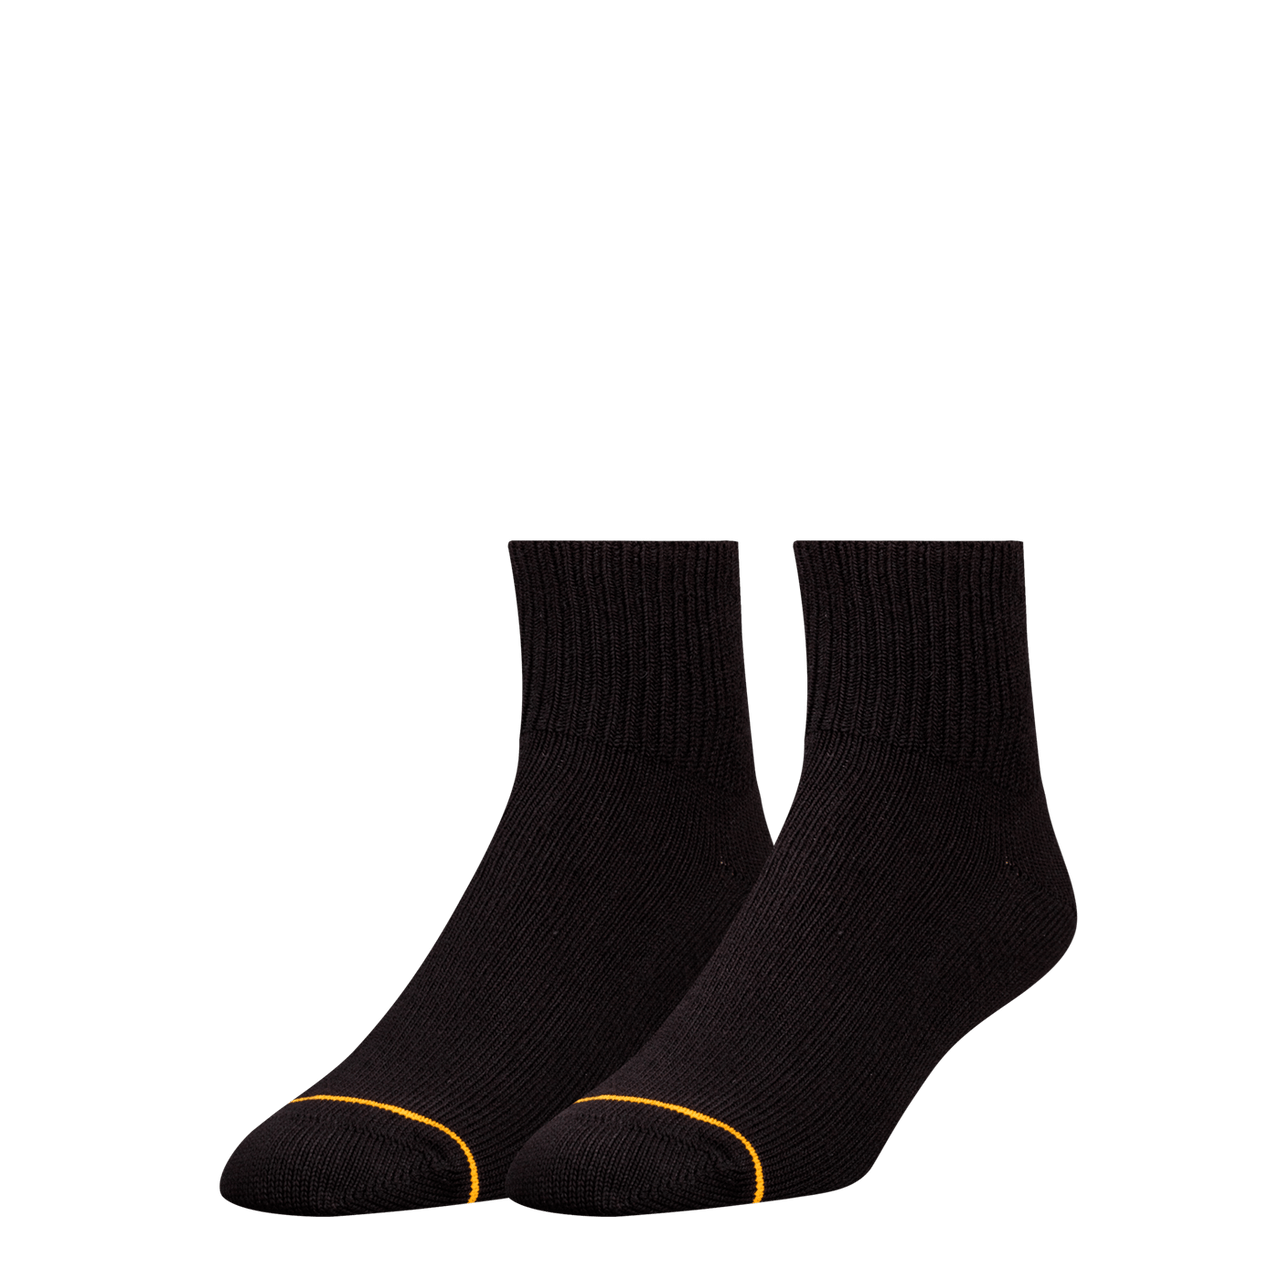 3 Pair Men's Socks short Shaft Without Rubber Extra Soft Rim Black 39 To 46